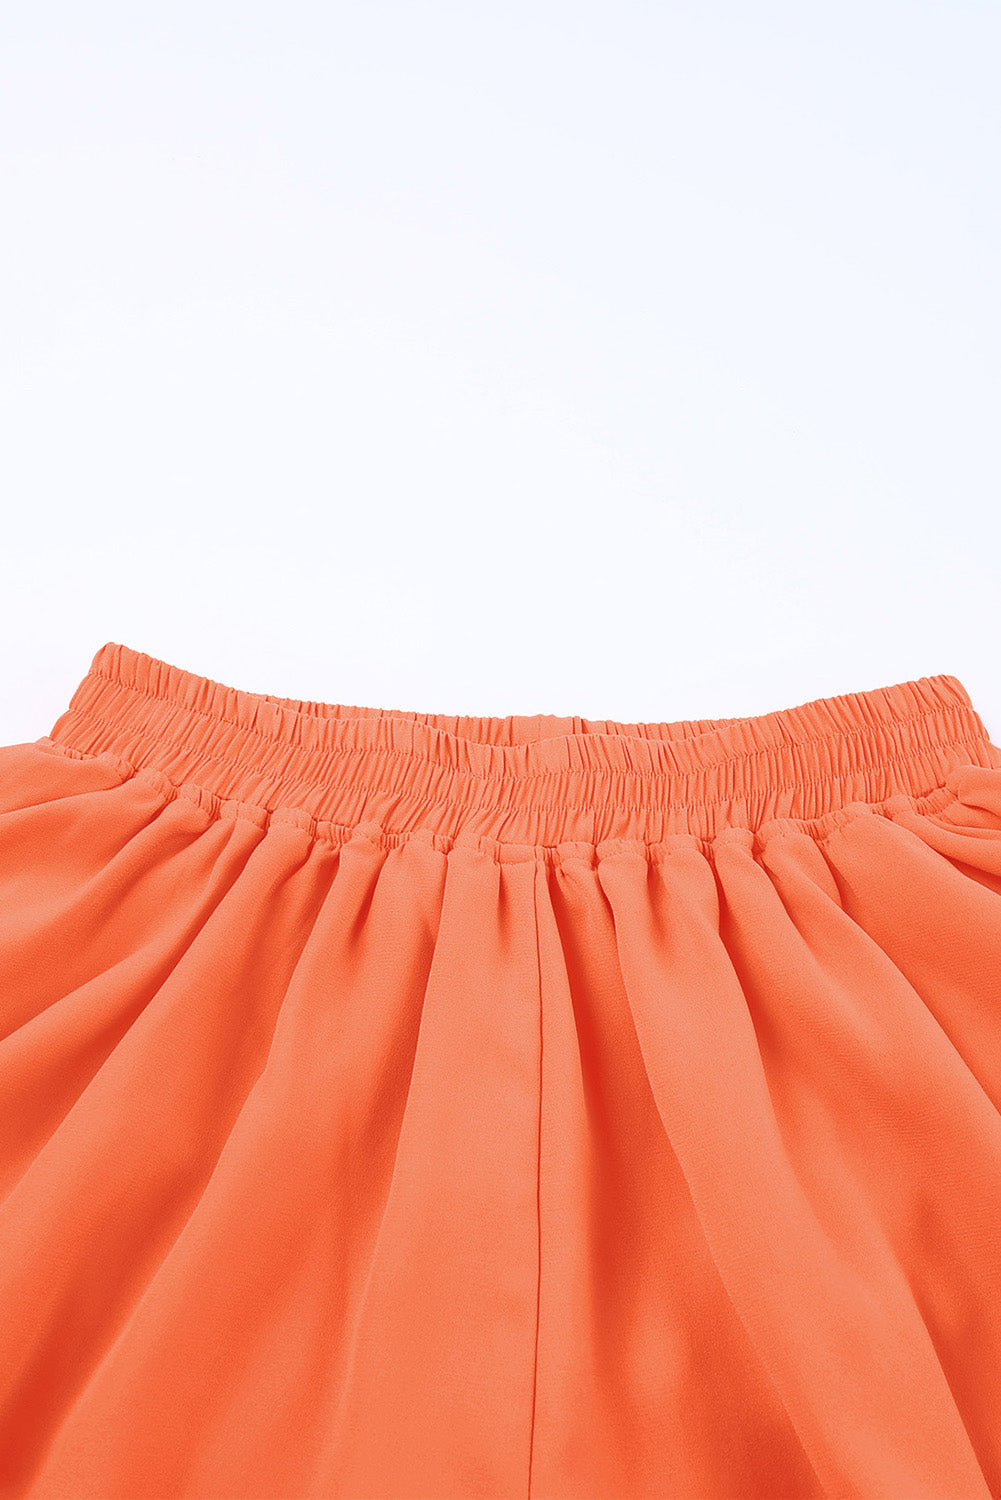 Tropic Pacific Layered Sports Skirt